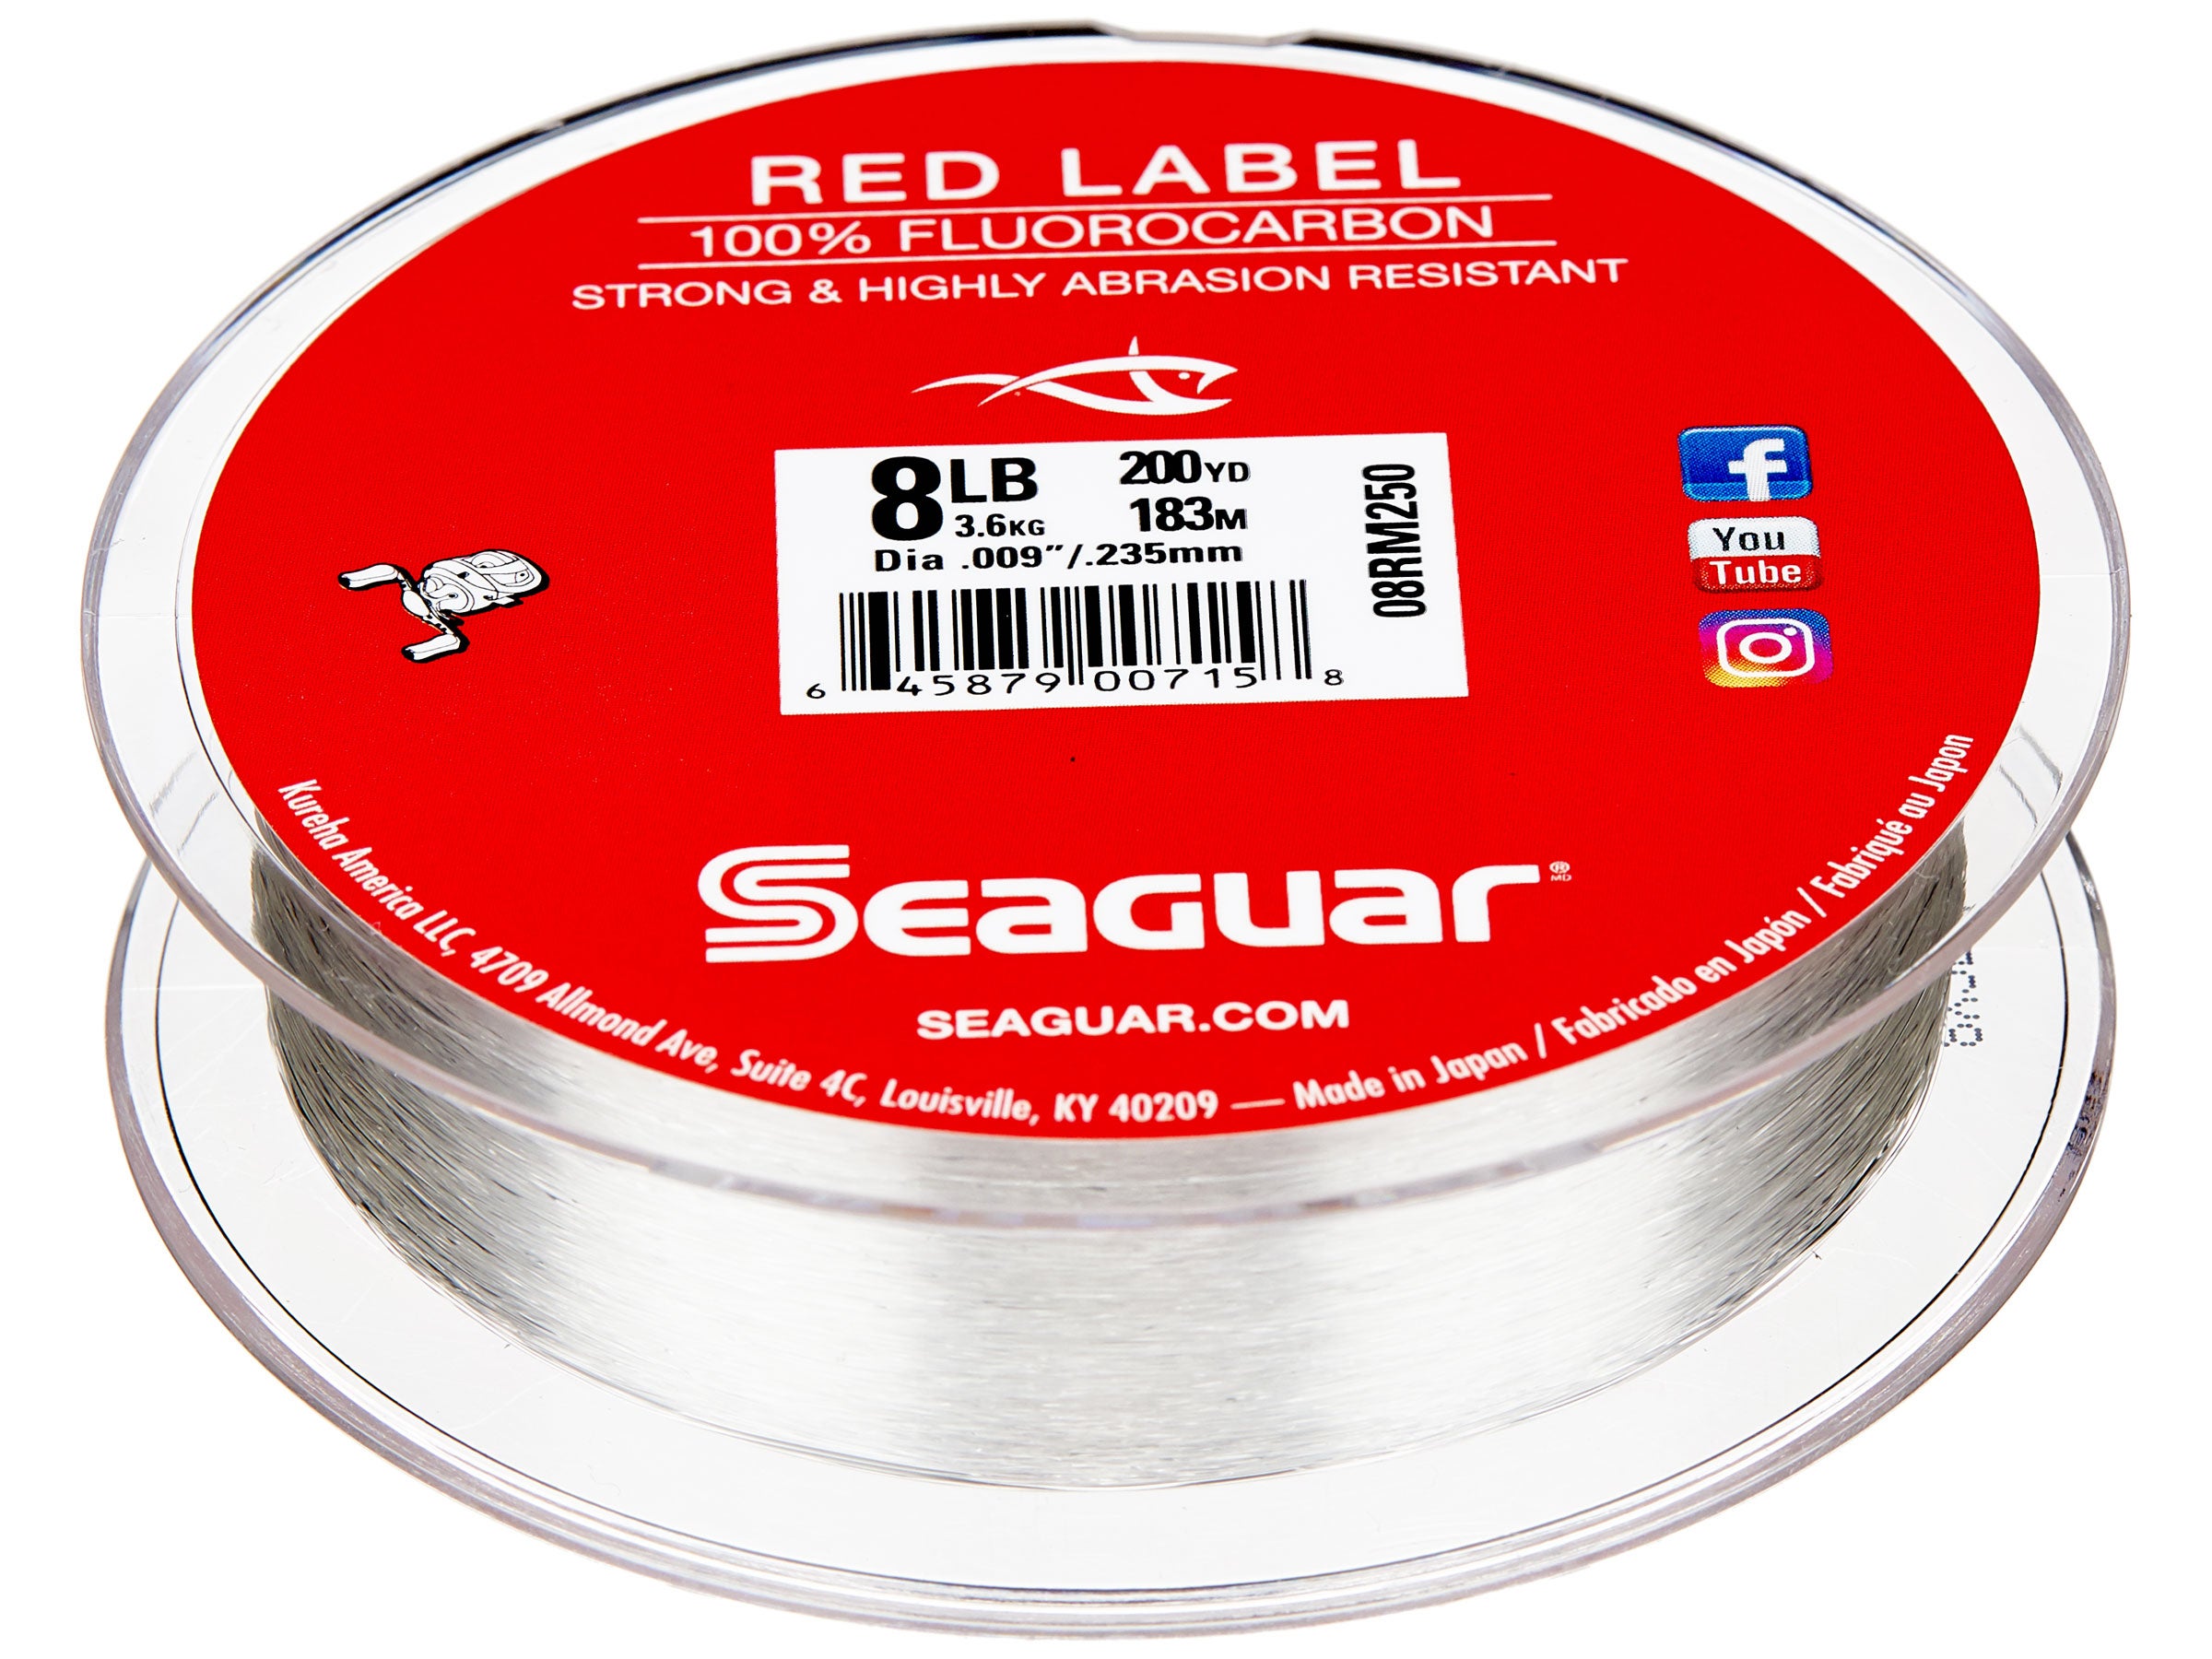 Seaguar Red Label Fluorocarbon 200 yards Fishing Line 4-Pounds 